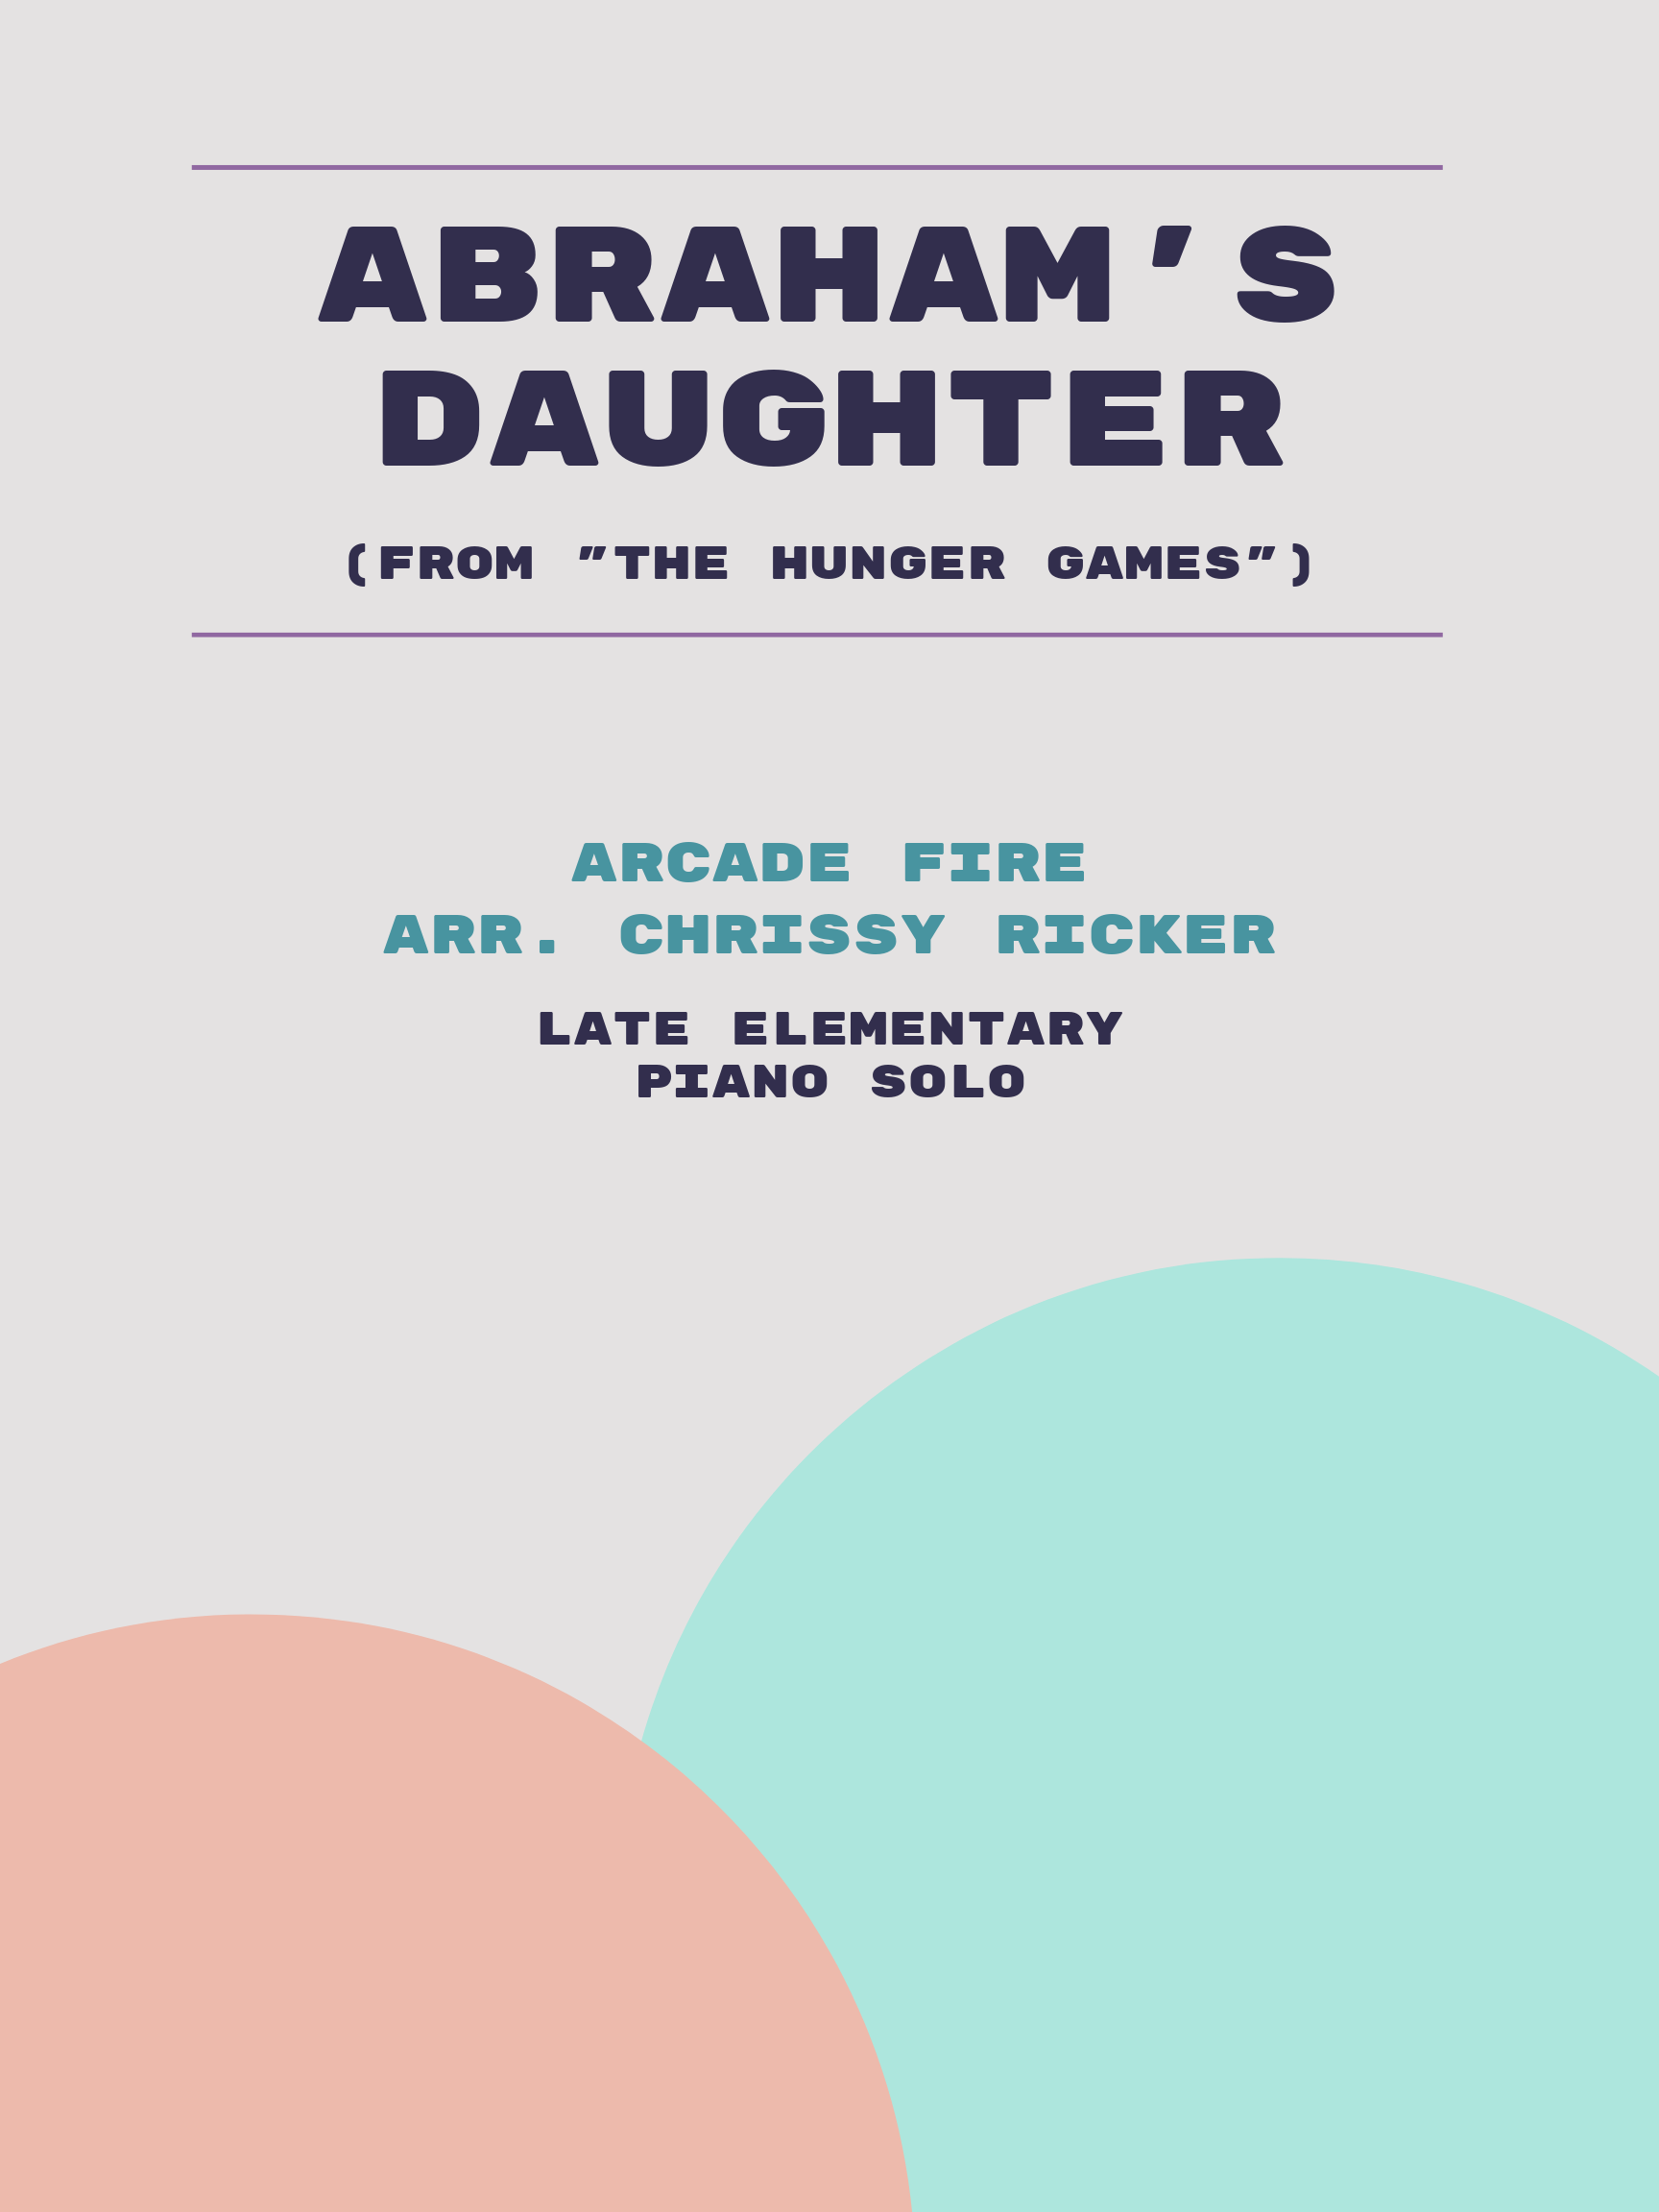 Abraham's Daughter by Arcade Fire